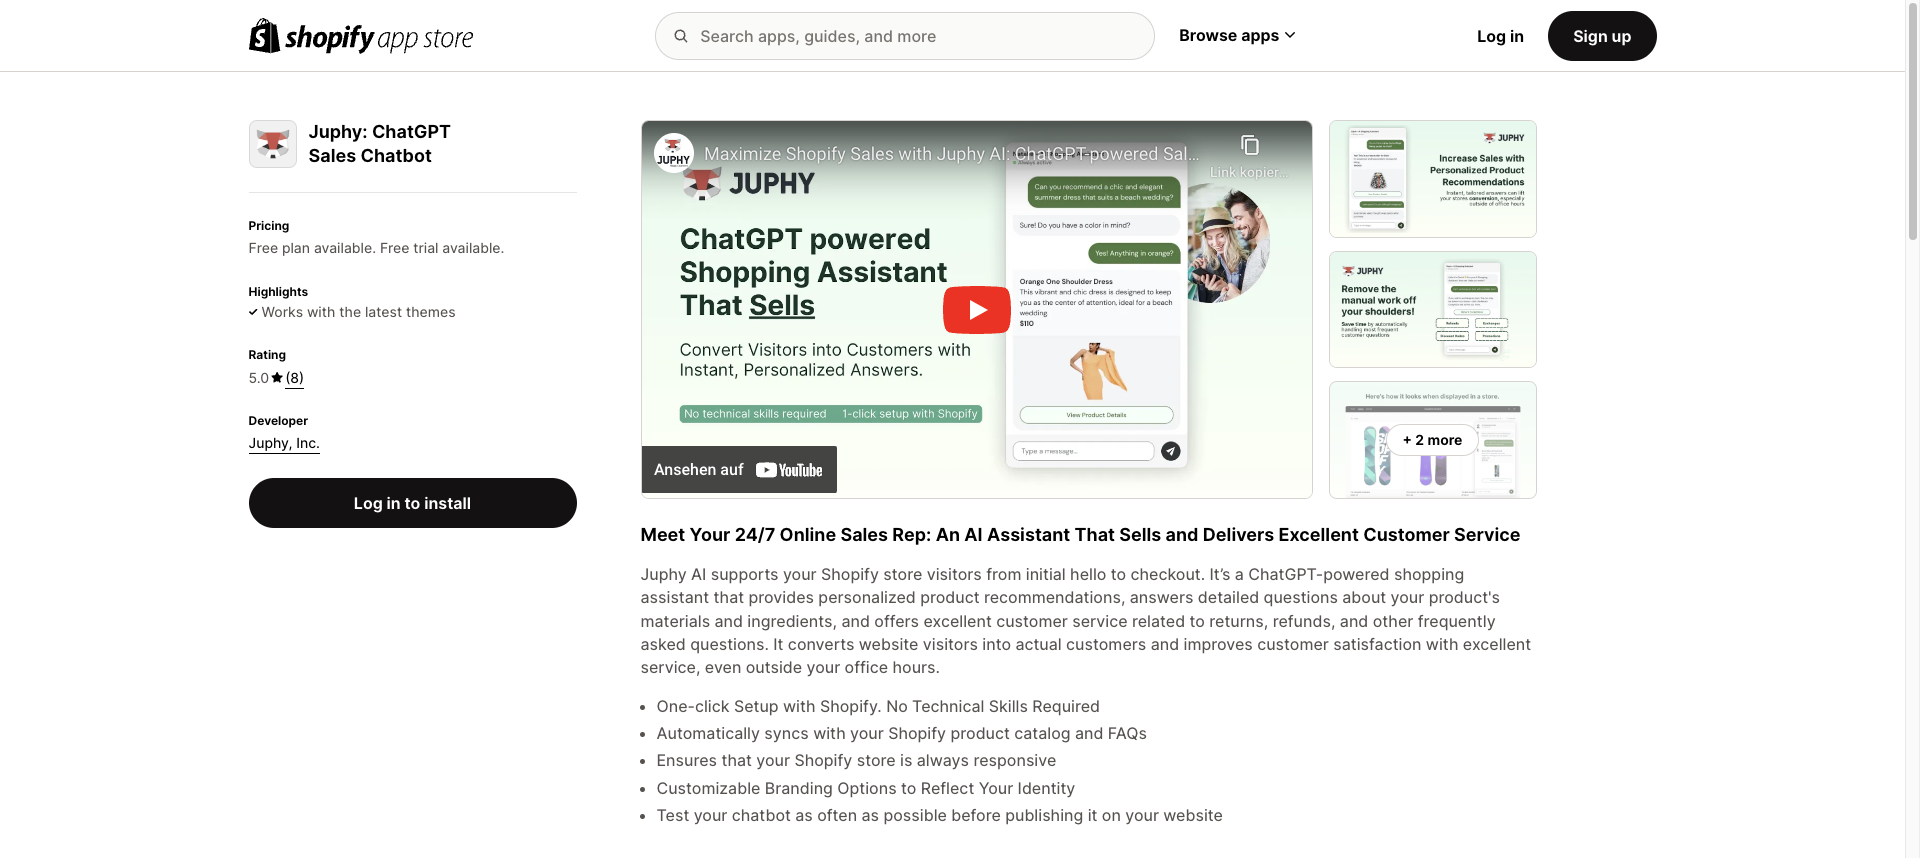 In just two minutes, you can connect your Shopify store to Juphy AI.